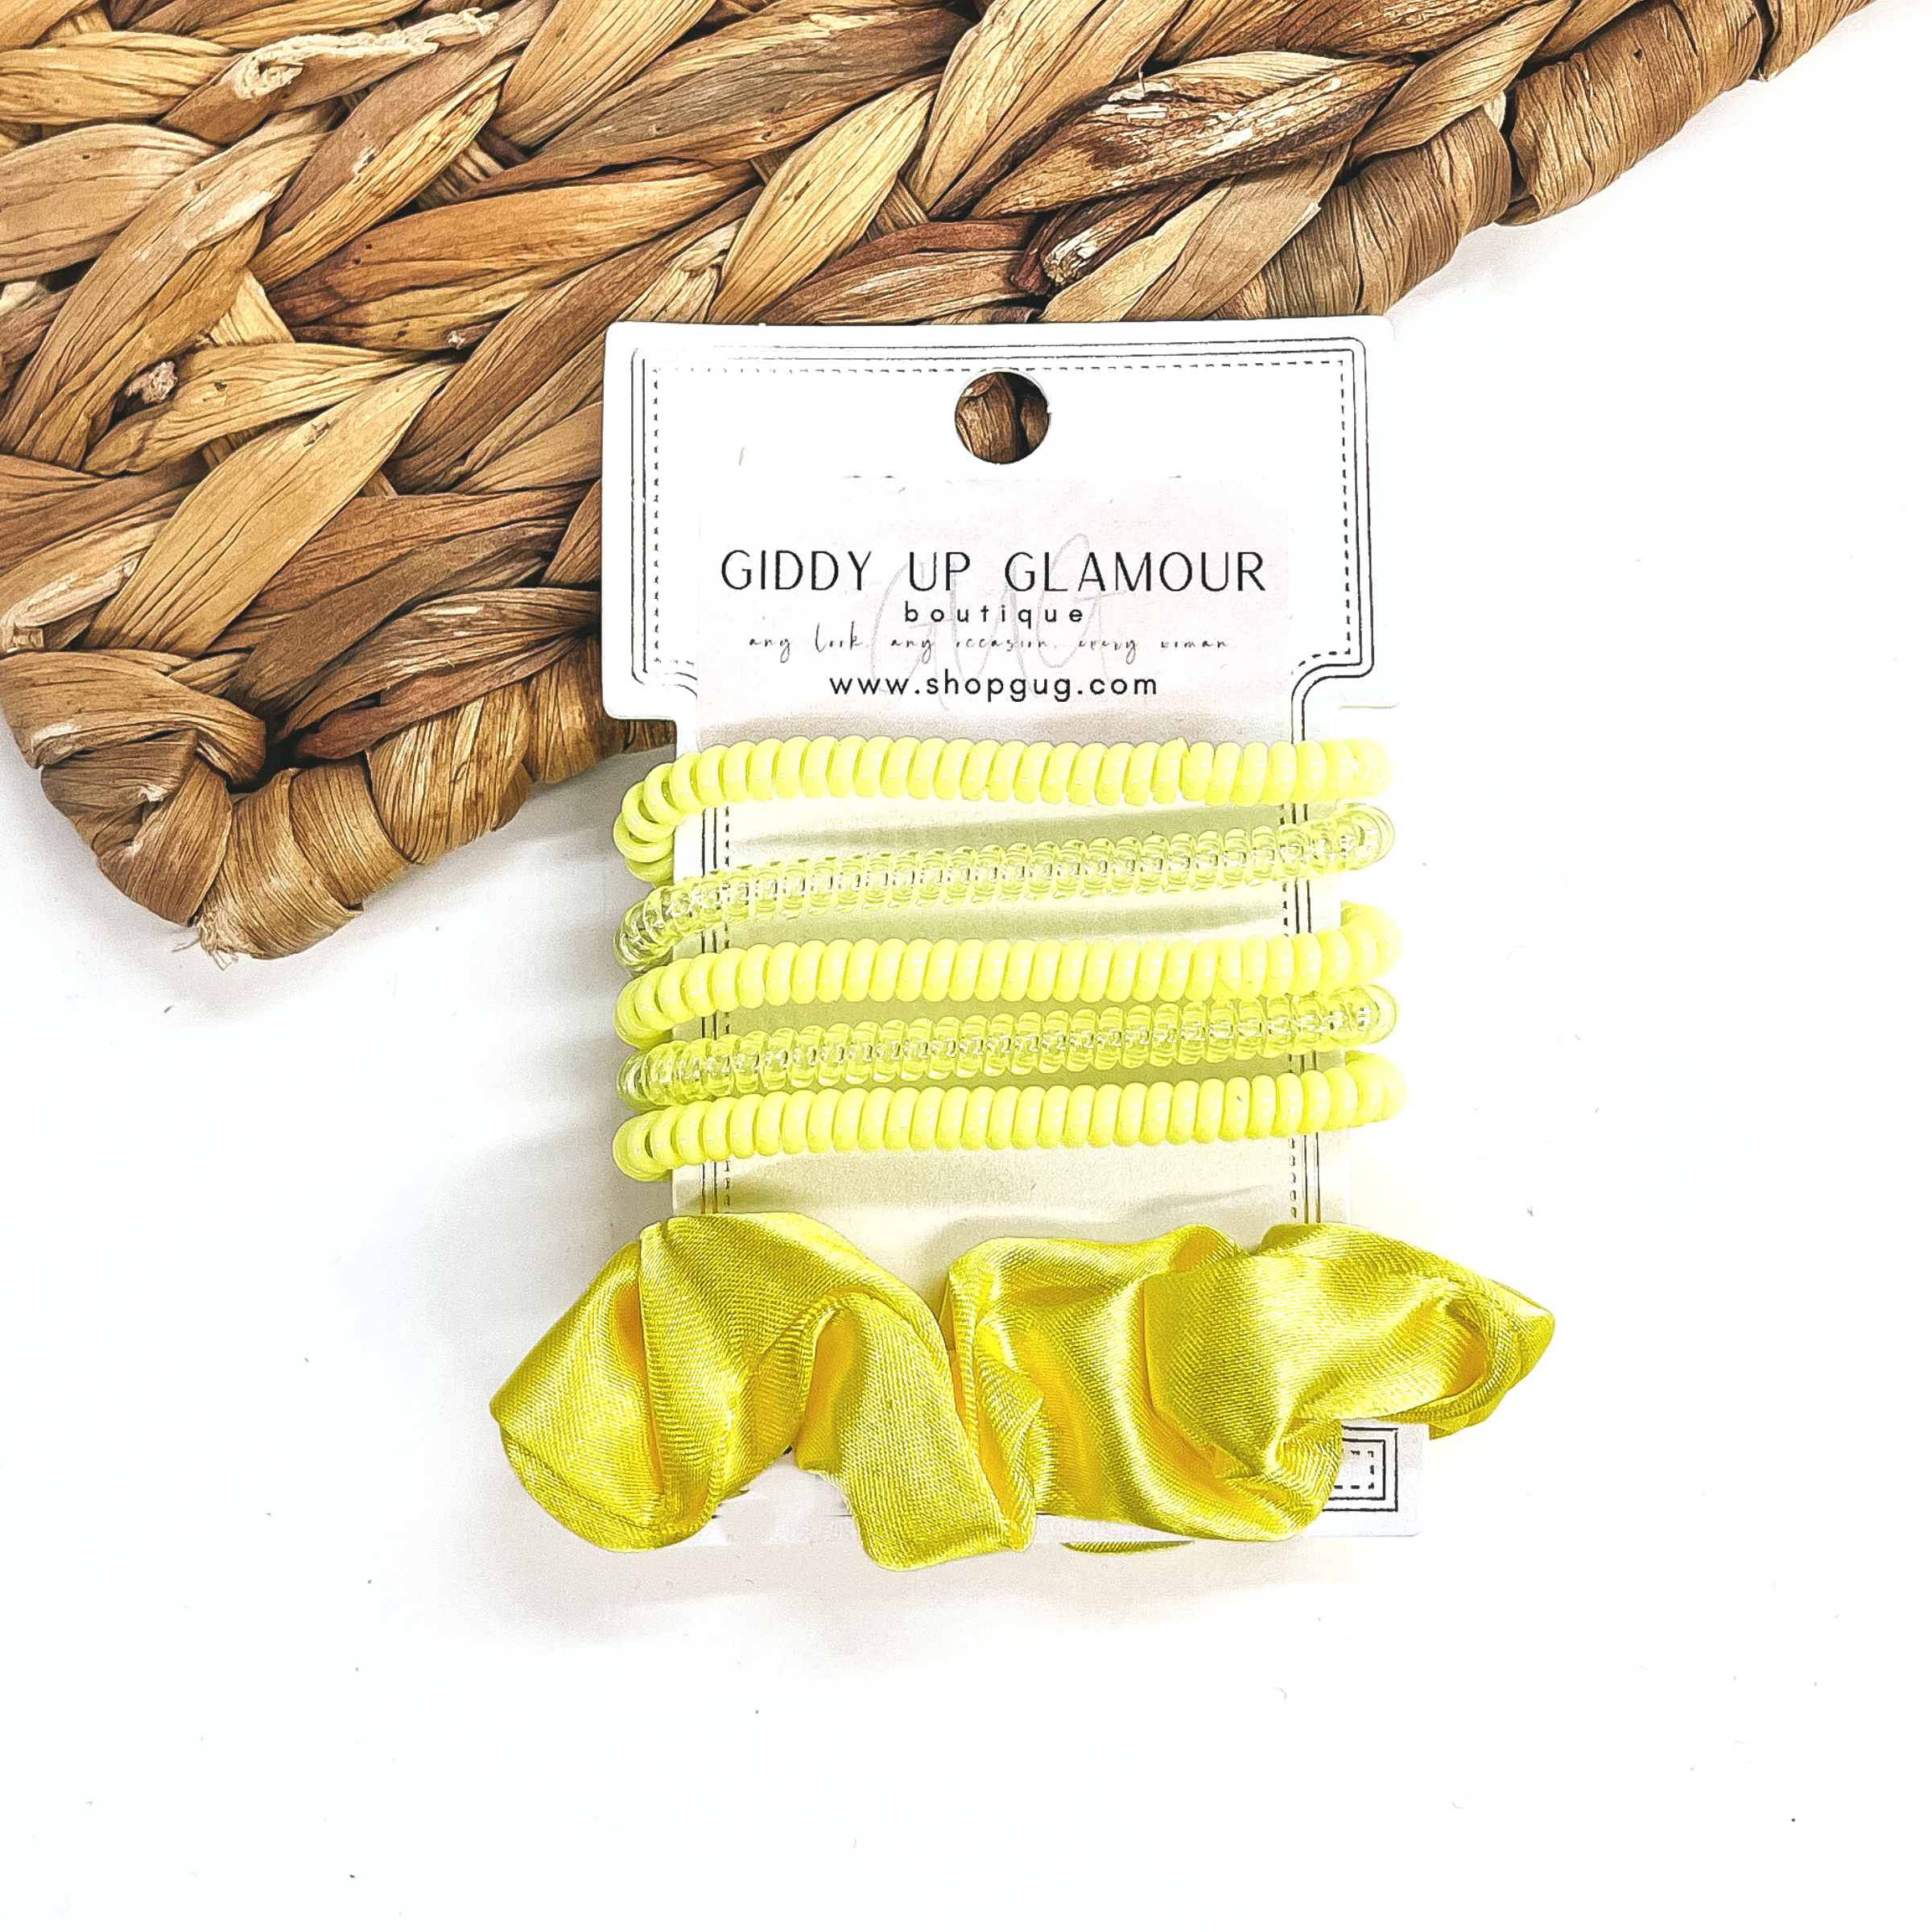 A set of six hair ties, five spiral and one satin scrunchie in yellow. There are three  solid color spiral hair ties and two transparent. These hair ties are on a white  cardboard piece with a Giddy Up Glamour logo, they are leaned up against a brown woven  plate and a white background.